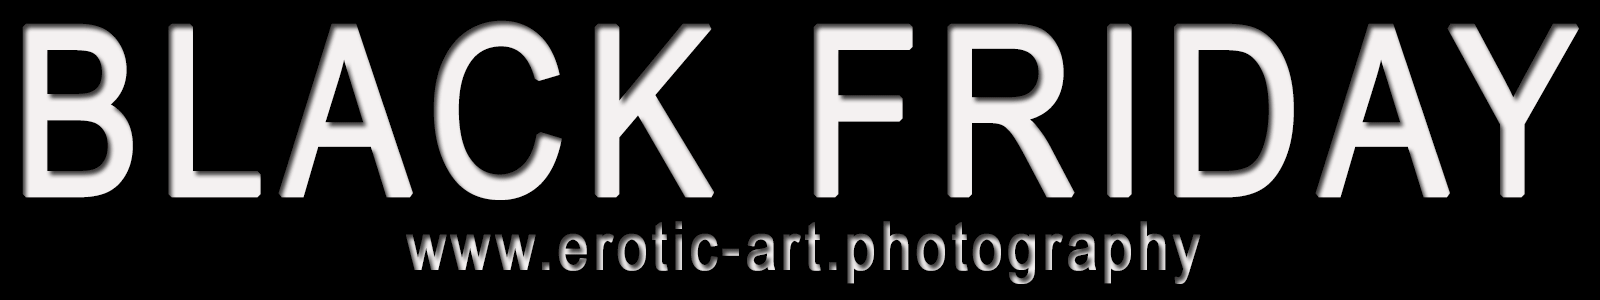 BLACK FRIDAY OFFER ON EROTIC ART PHOTOGRAPHY